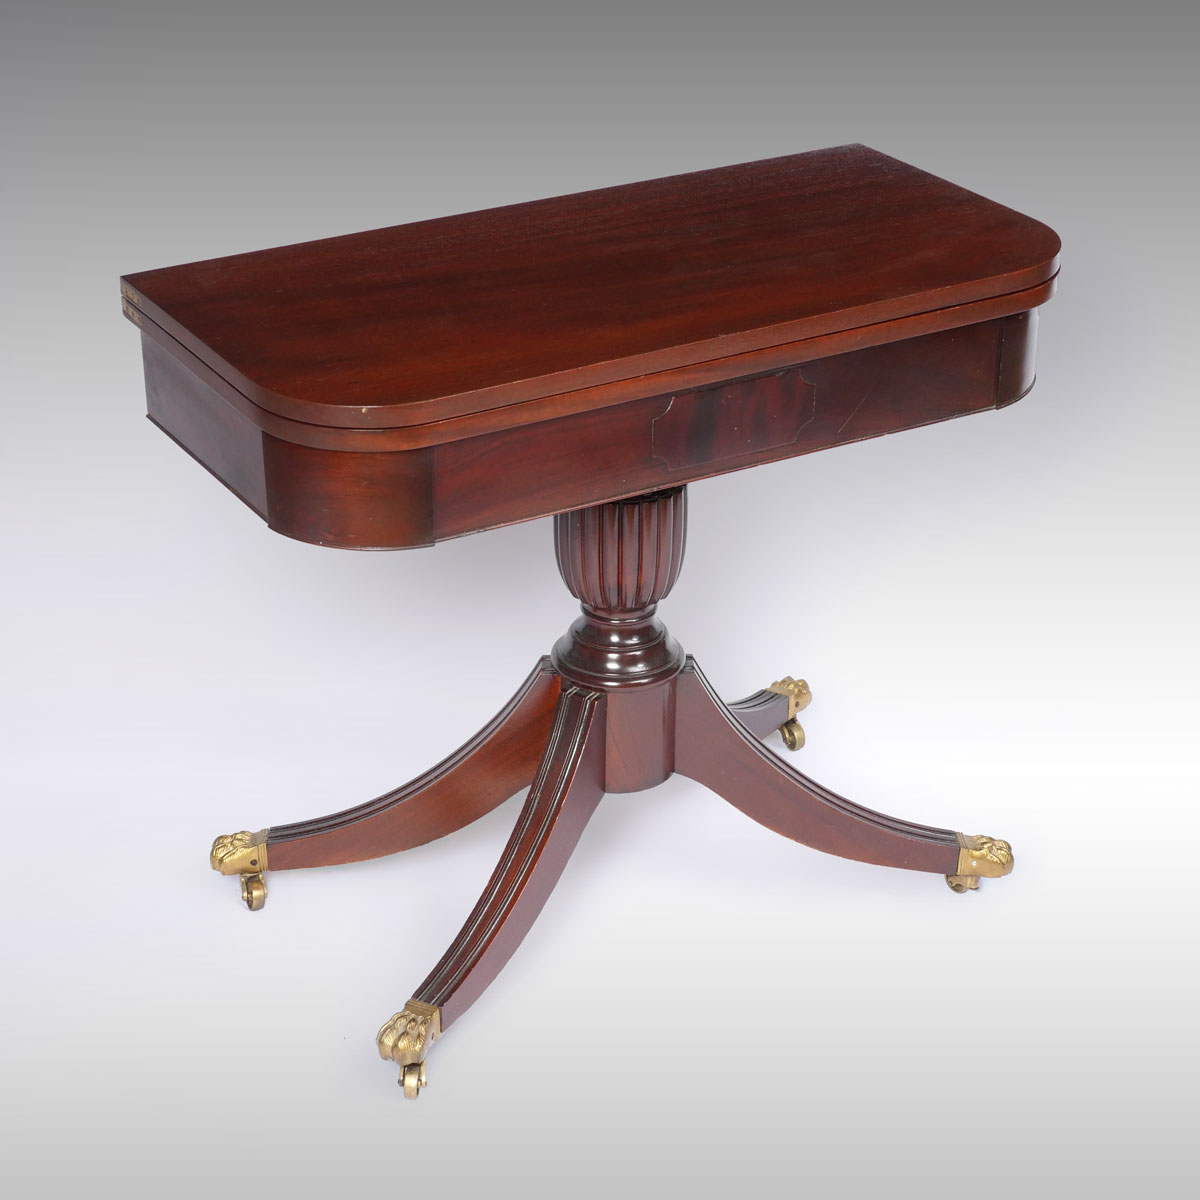 MAHOGANY GAME TABLE: Game table with